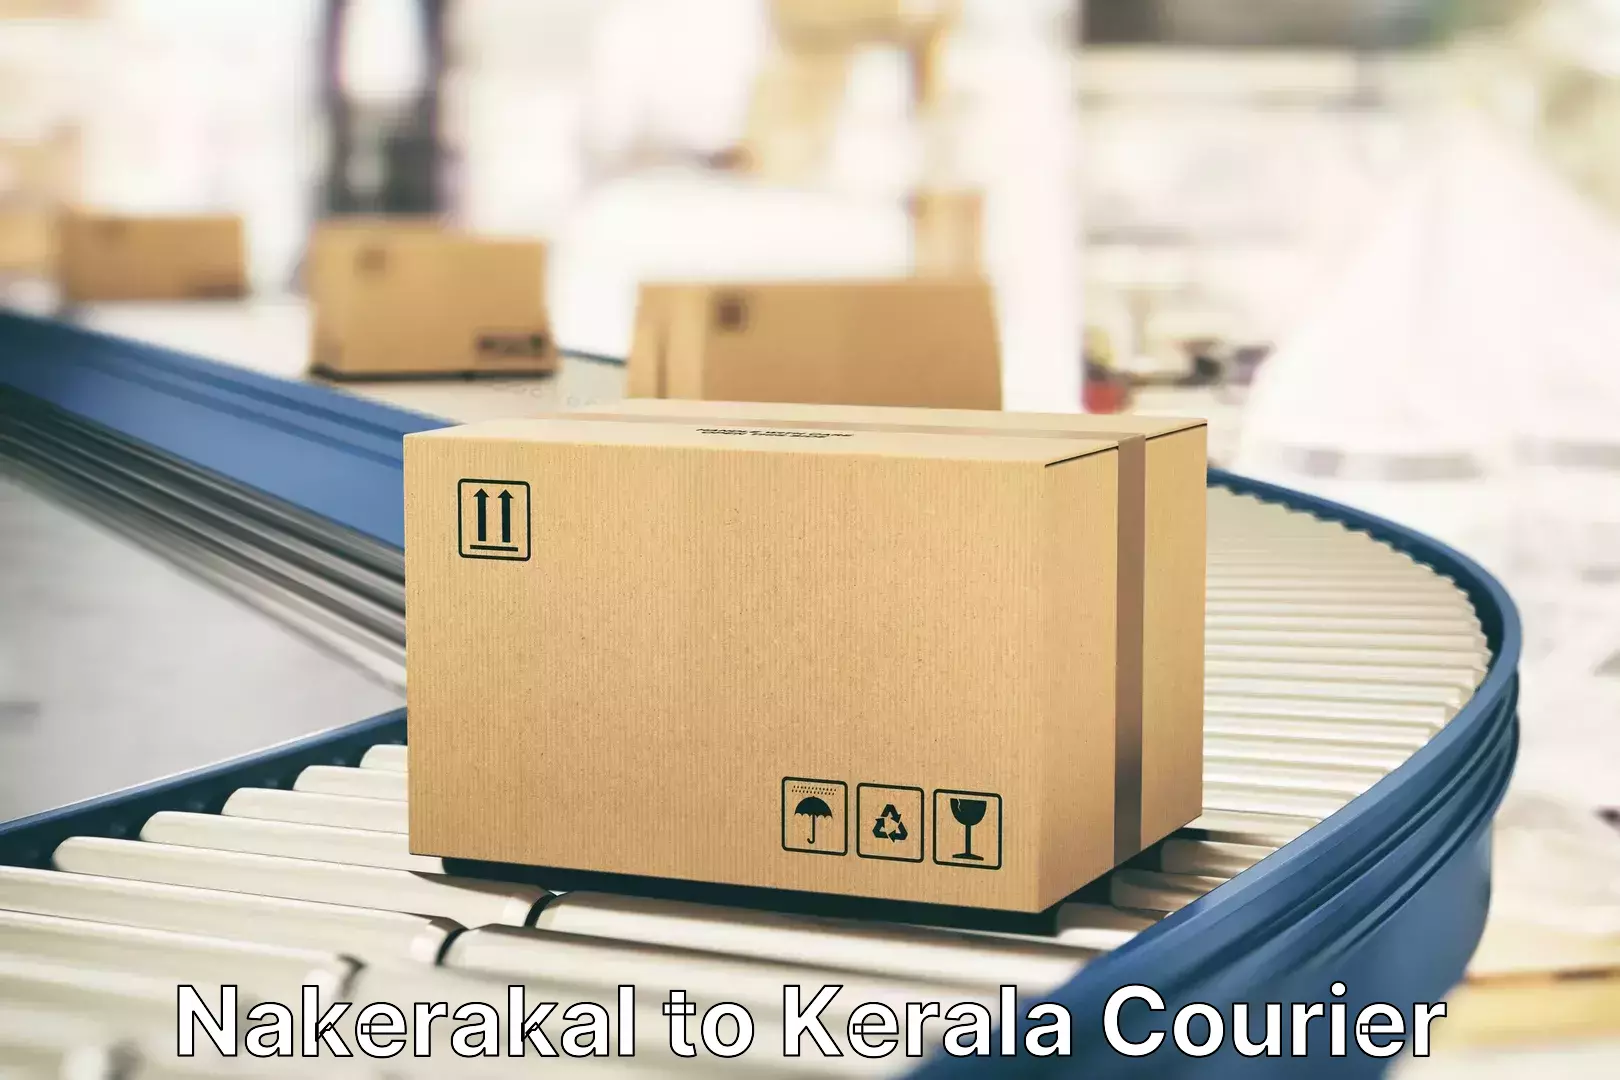 Doorstep luggage collection Nakerakal to Cochin University of Science and Technology